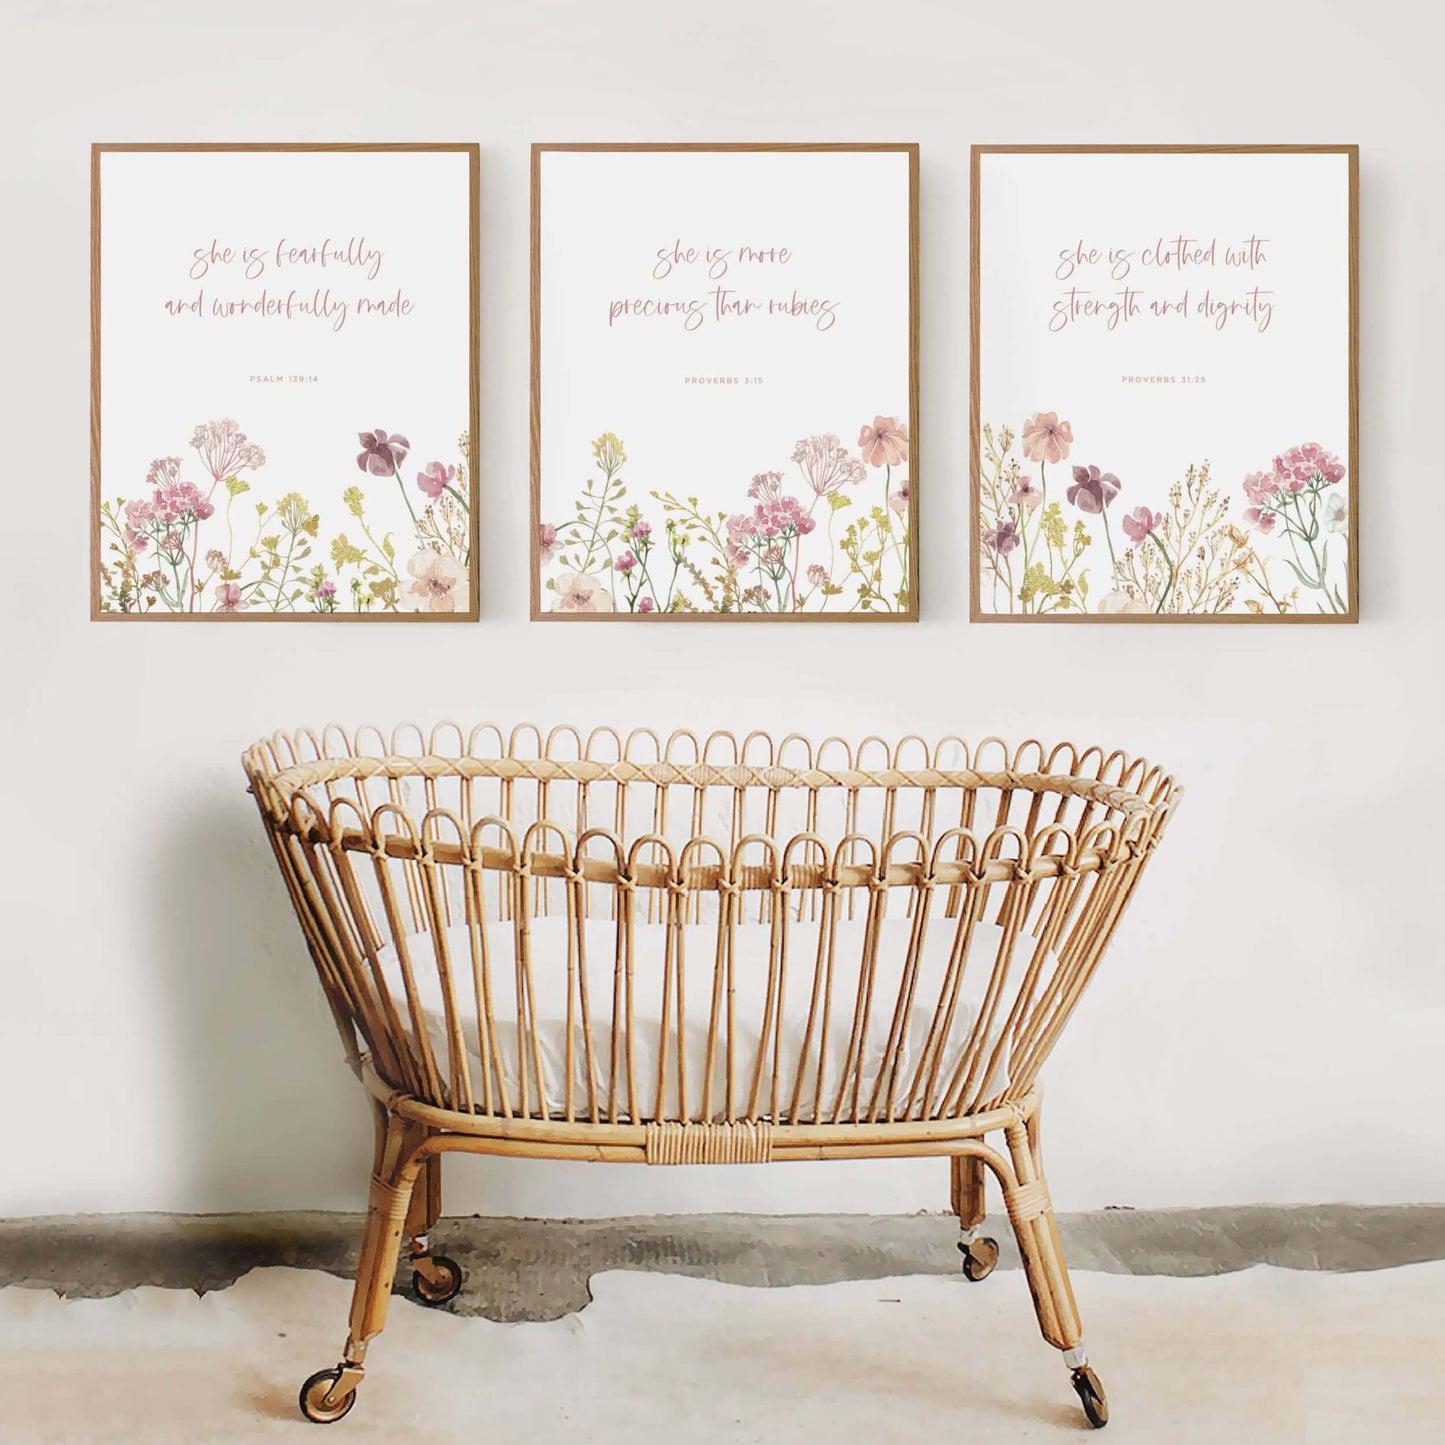 Christian nursery wall art with bible verse and flowers set of 3